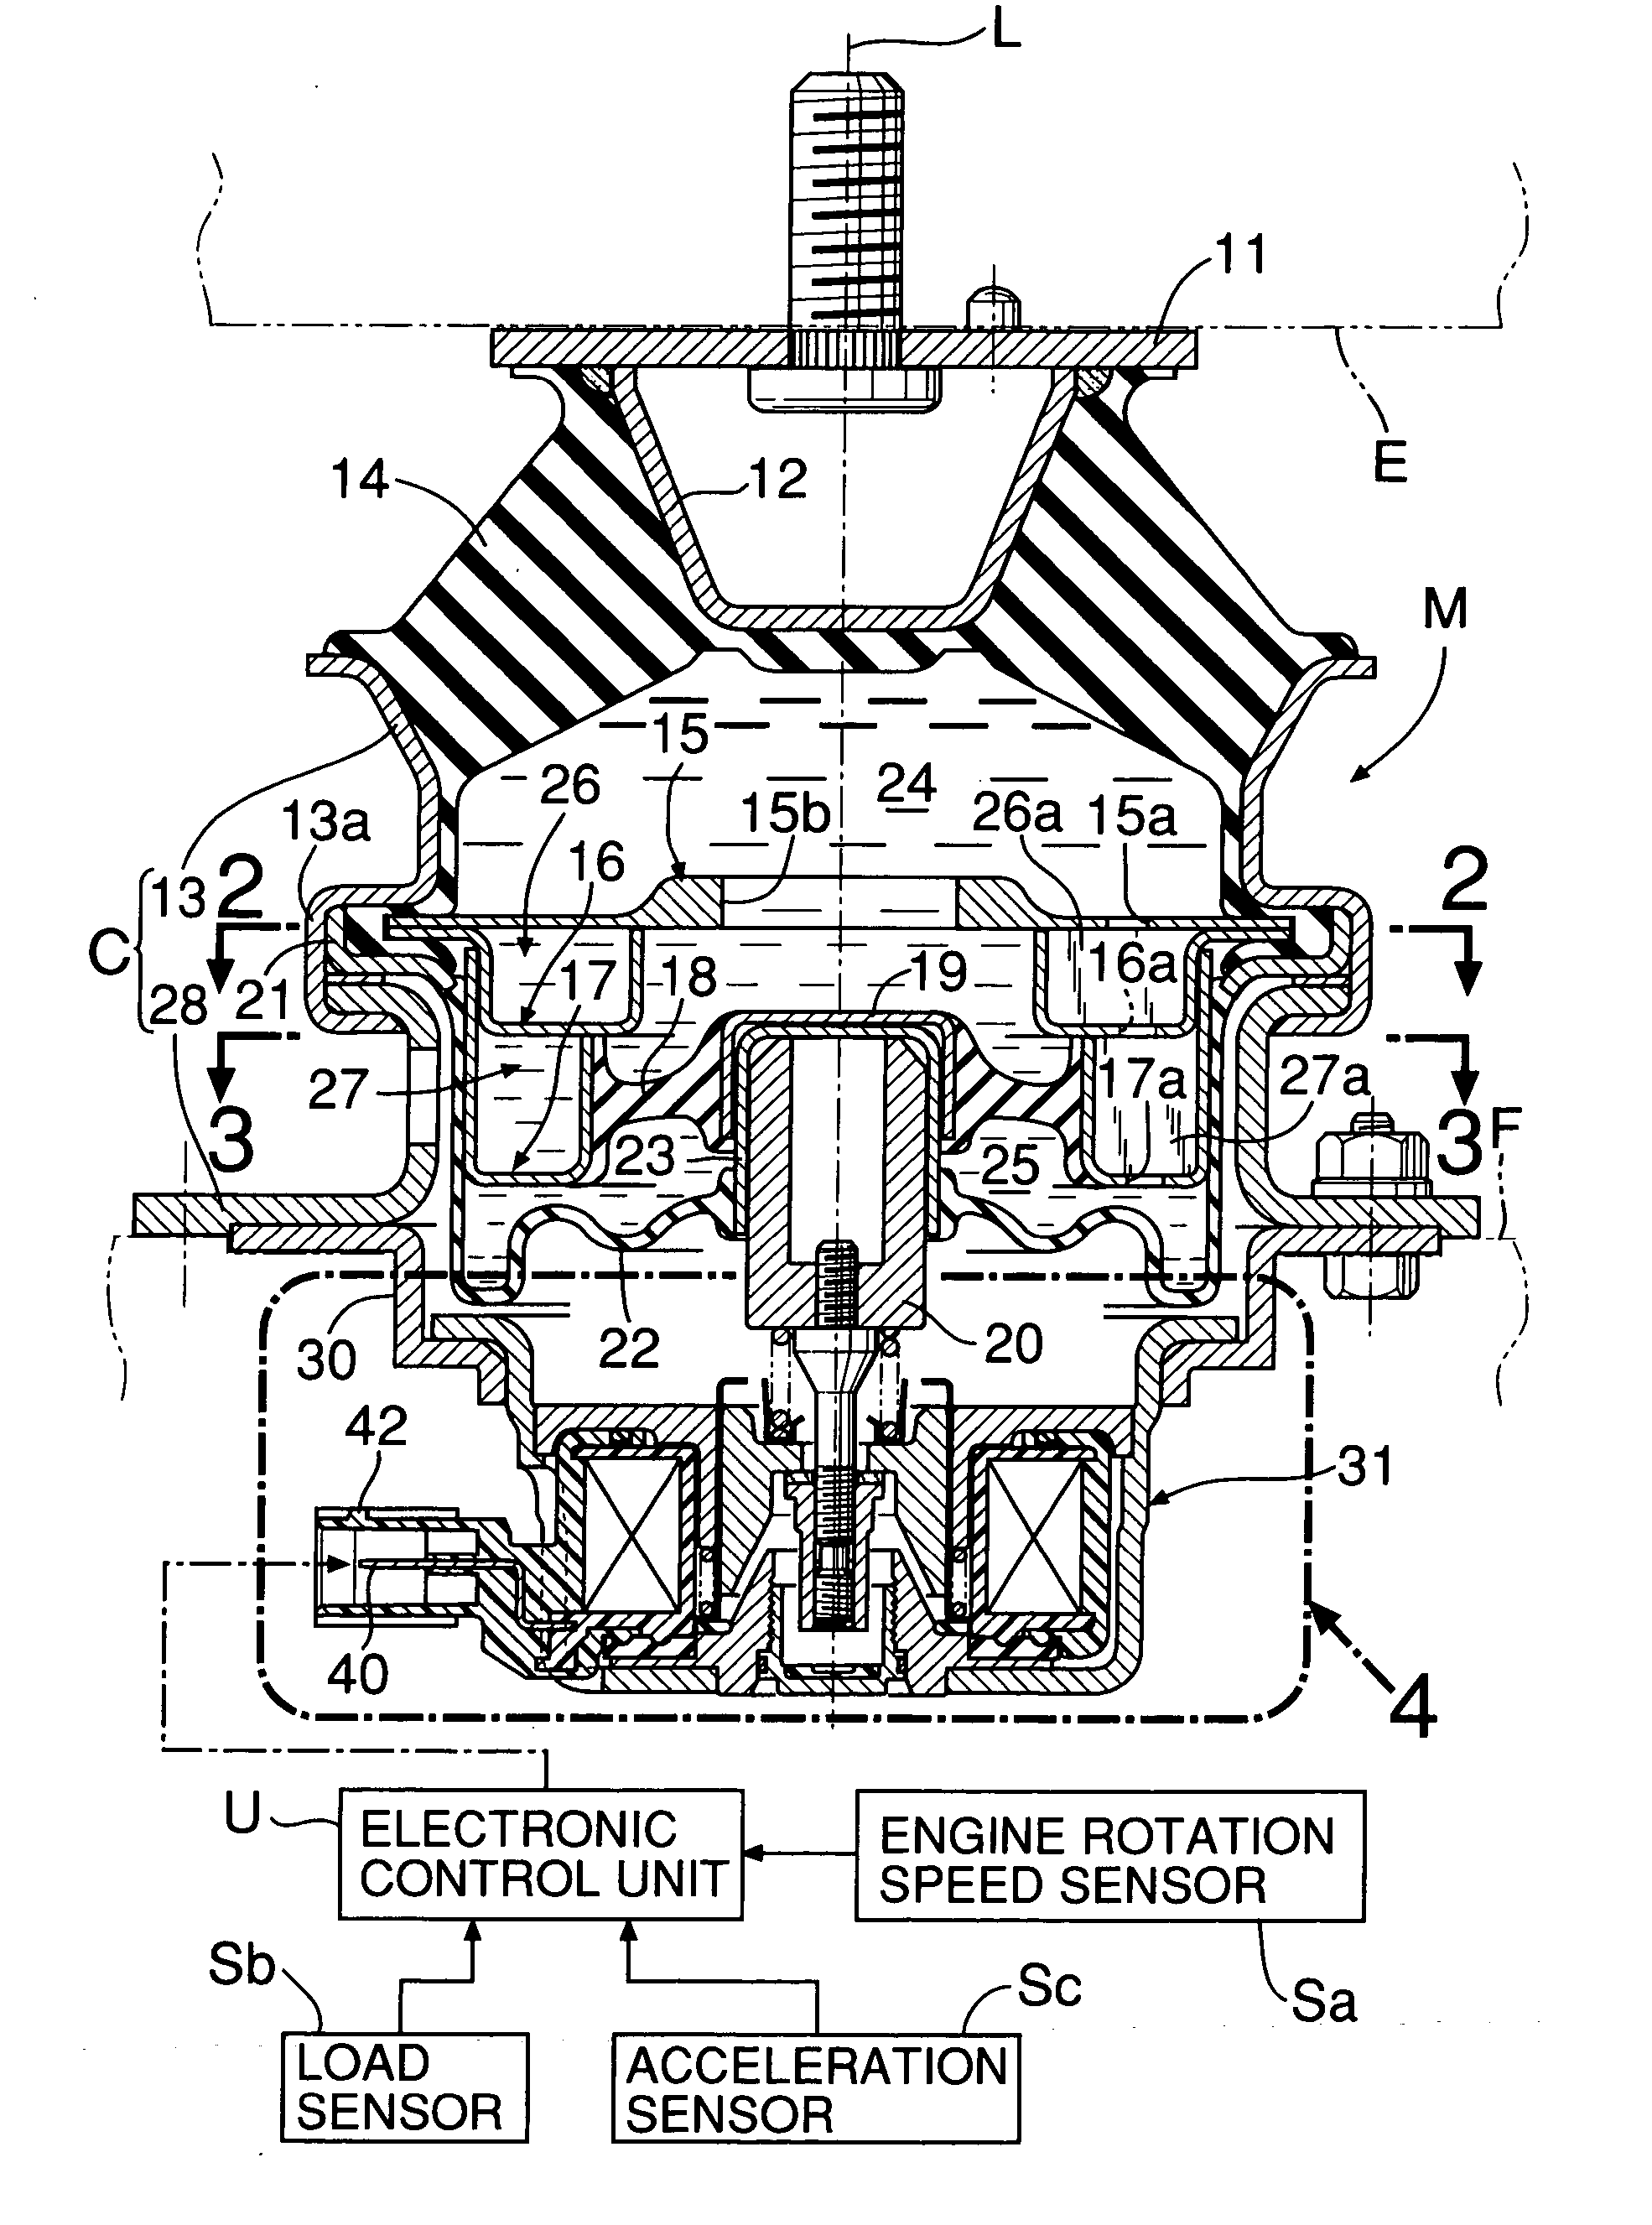 Active type vibration isolating support system